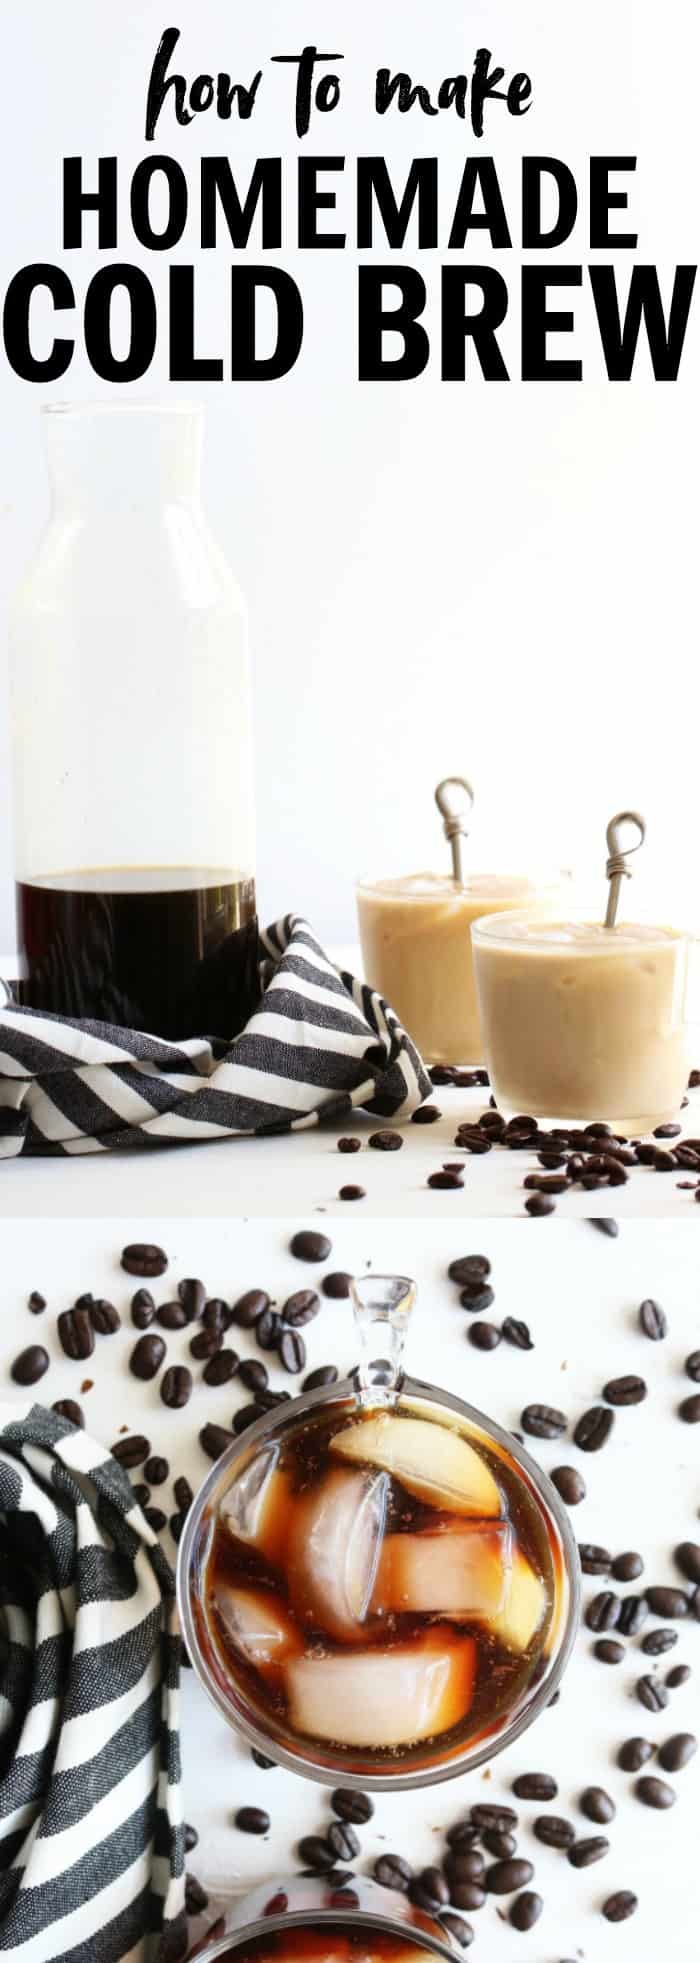 I'm so excited to share how to make homemade cold brew coffee with you guys!! Let's face it, my coffee shape habit adds up! I love having a pitcher of homemade cold brew in my fridge for that afternoon indulgence! thetoastedpinenut.com #thetoastedpinenut #howto #diy #homemade #coldbrew #coffee